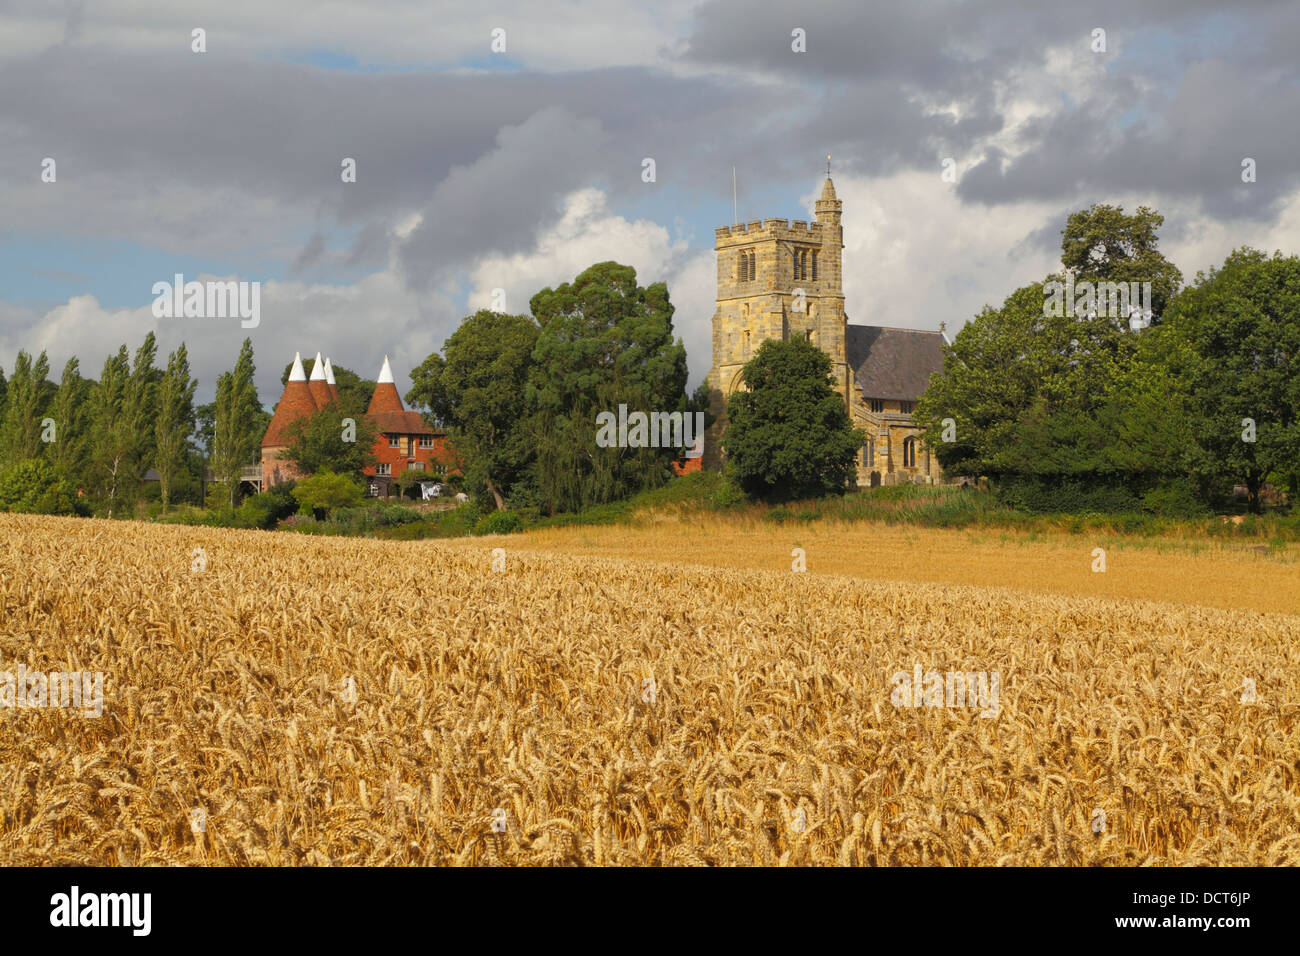 Harvest time at picturesque Horsmonden, Kent. St Margaret's Church and Oast House, England Britain UK. Wealden Kent Countryside Stock Photo